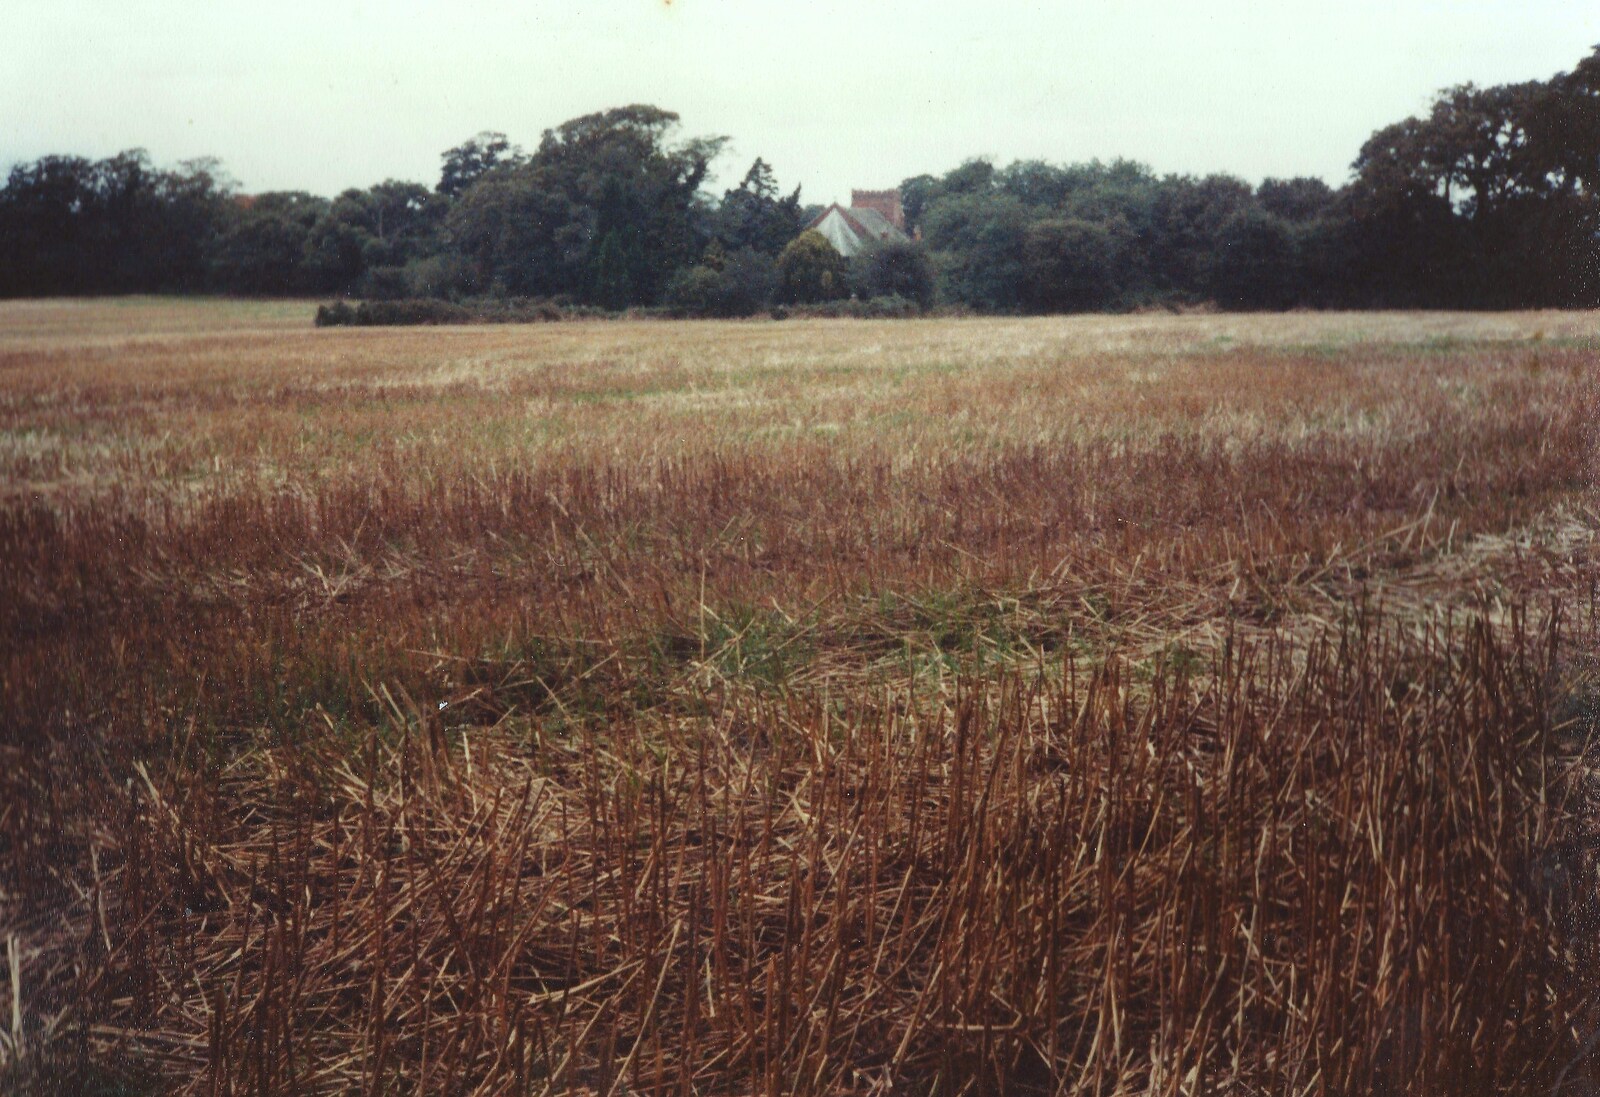 Looking across the subble towards the church from Constructing a Vineyard, Harrow Road, Bransgore, Dorset - 1st September 1981